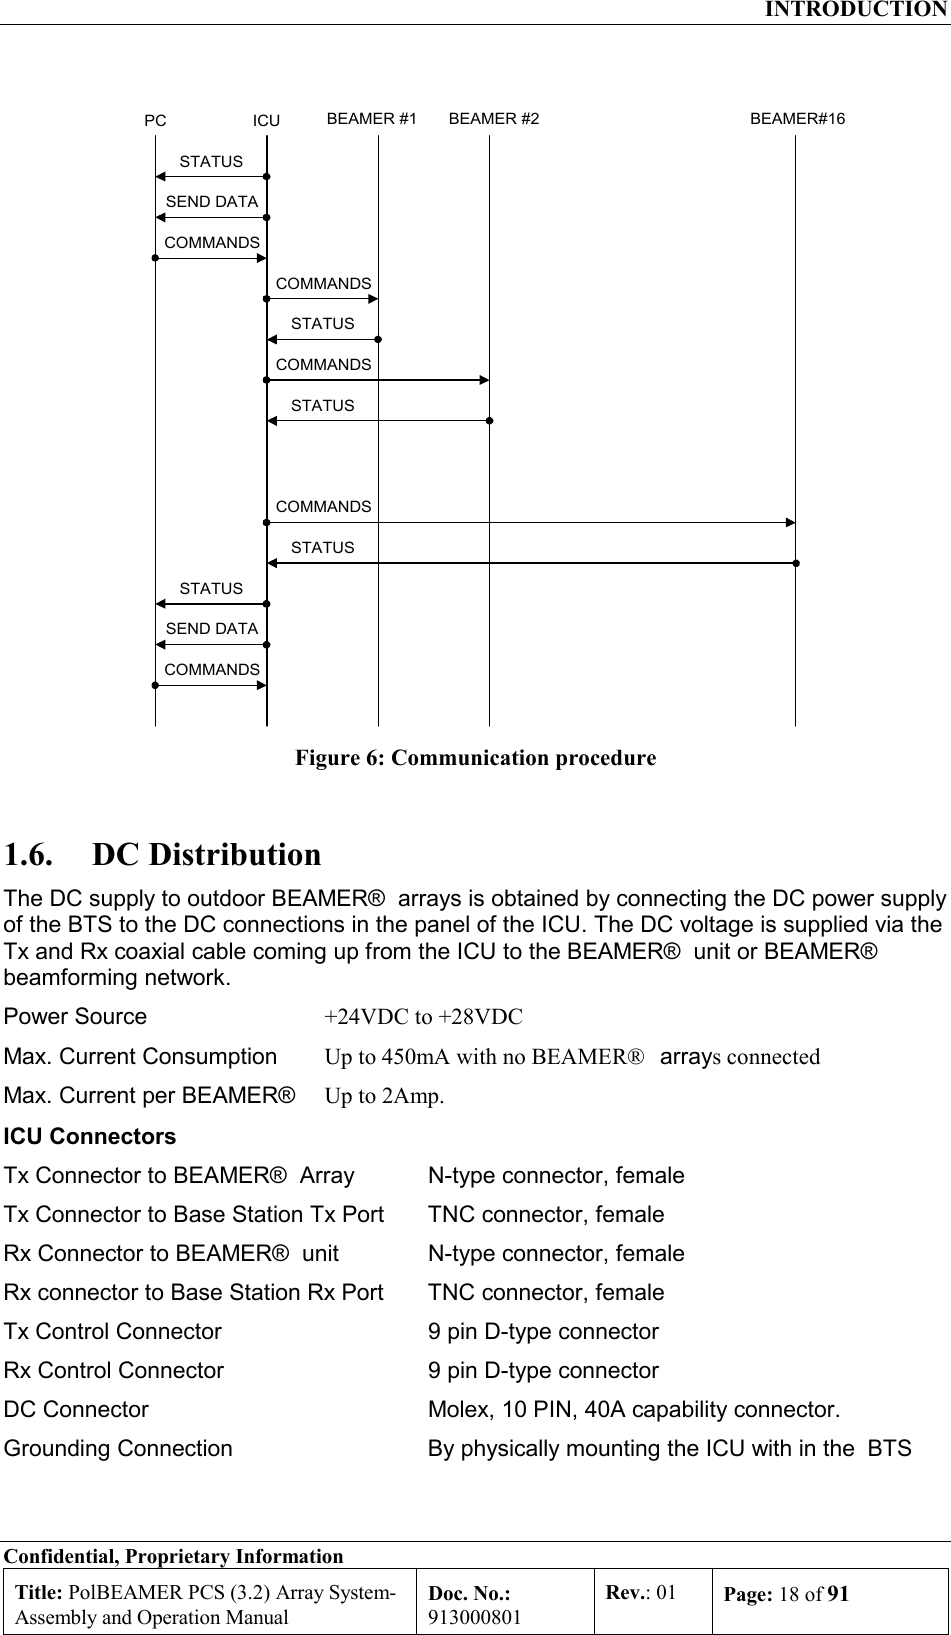  INTRODUCTION Confidential, Proprietary Information Title: PolBEAMER PCS (3.2) Array System- Assembly and Operation Manual Doc. No.: 913000801 Rev.: 01  Page: 18 of 91  PC ICU BEAMER #1SEND DATACOMMANDSCOMMANDSSTATUSSTATUSSEND DATABEAMER #2 BEAMER#16COMMANDSSTATUSCOMMANDSSTATUSCOMMANDSSTATUS Figure 6: Communication procedure 1.6. DC Distribution The DC supply to outdoor BEAMER®  arrays is obtained by connecting the DC power supply of the BTS to the DC connections in the panel of the ICU. The DC voltage is supplied via the Tx and Rx coaxial cable coming up from the ICU to the BEAMER®  unit or BEAMER®  beamforming network.  Power Source  +24VDC to +28VDC  Max. Current Consumption  Up to 450mA with no BEAMER®   arrays connected Max. Current per BEAMER®    Up to 2Amp. ICU Connectors Tx Connector to BEAMER®  Array   N-type connector, female Tx Connector to Base Station Tx Port   TNC connector, female Rx Connector to BEAMER®  unit   N-type connector, female Rx connector to Base Station Rx Port   TNC connector, female Tx Control Connector   9 pin D-type connector Rx Control Connector   9 pin D-type connector DC Connector   Molex, 10 PIN, 40A capability connector. Grounding Connection  By physically mounting the ICU with in the  BTS 